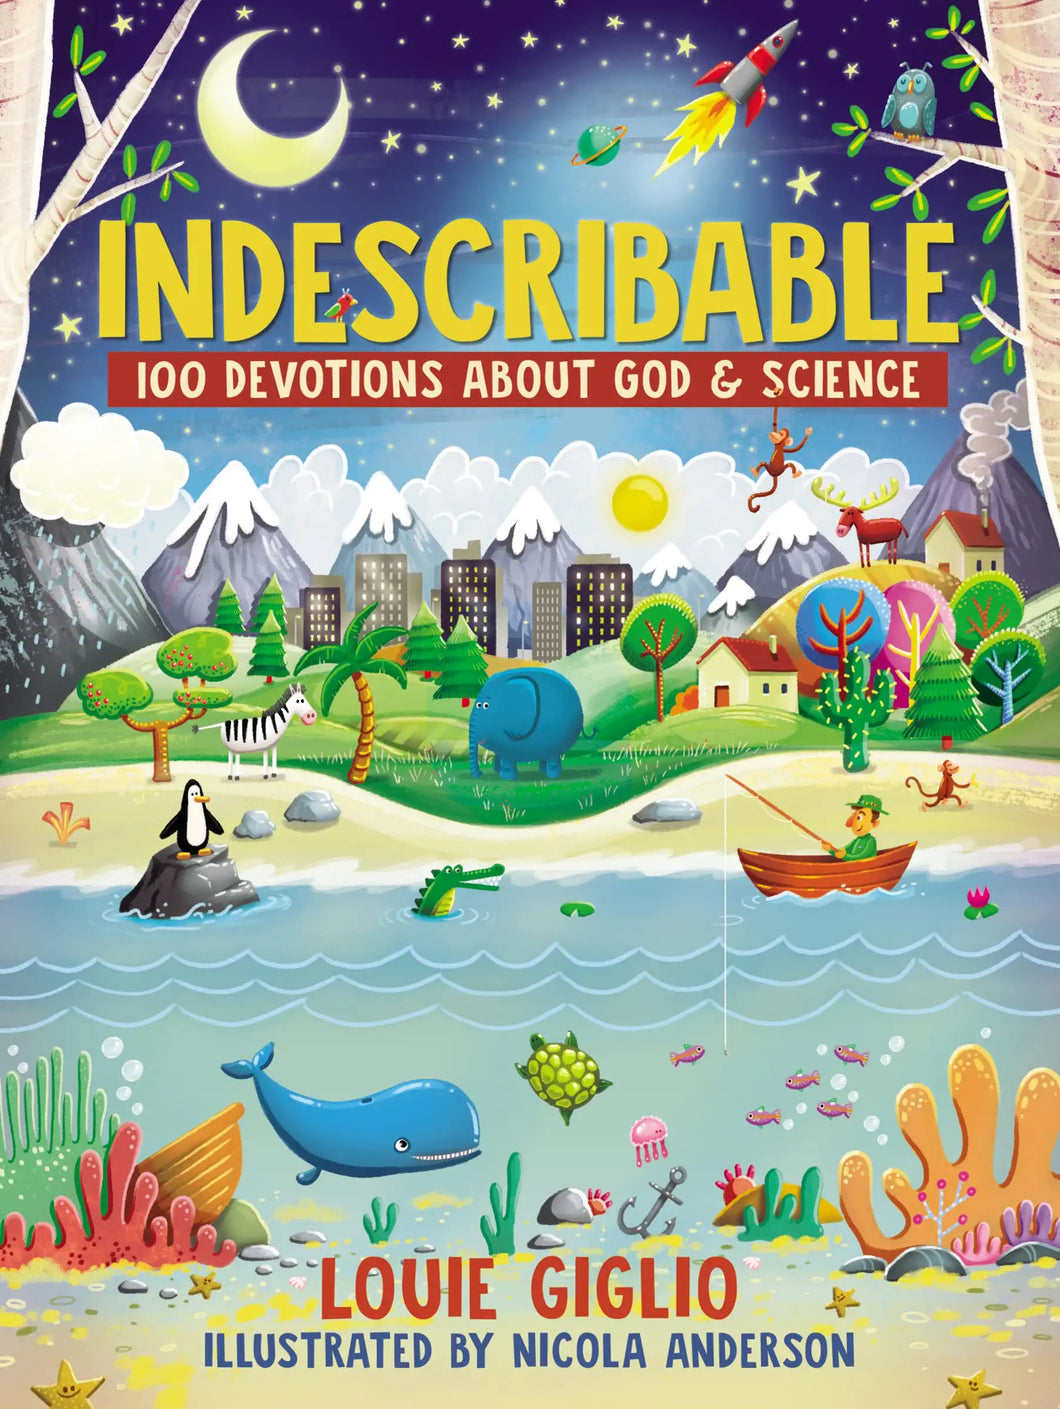 HOW GREAT IS OUR GOD- 100 INDESCRIBABLE DEVOTIONS ABOUT GOD AND SCIENCE